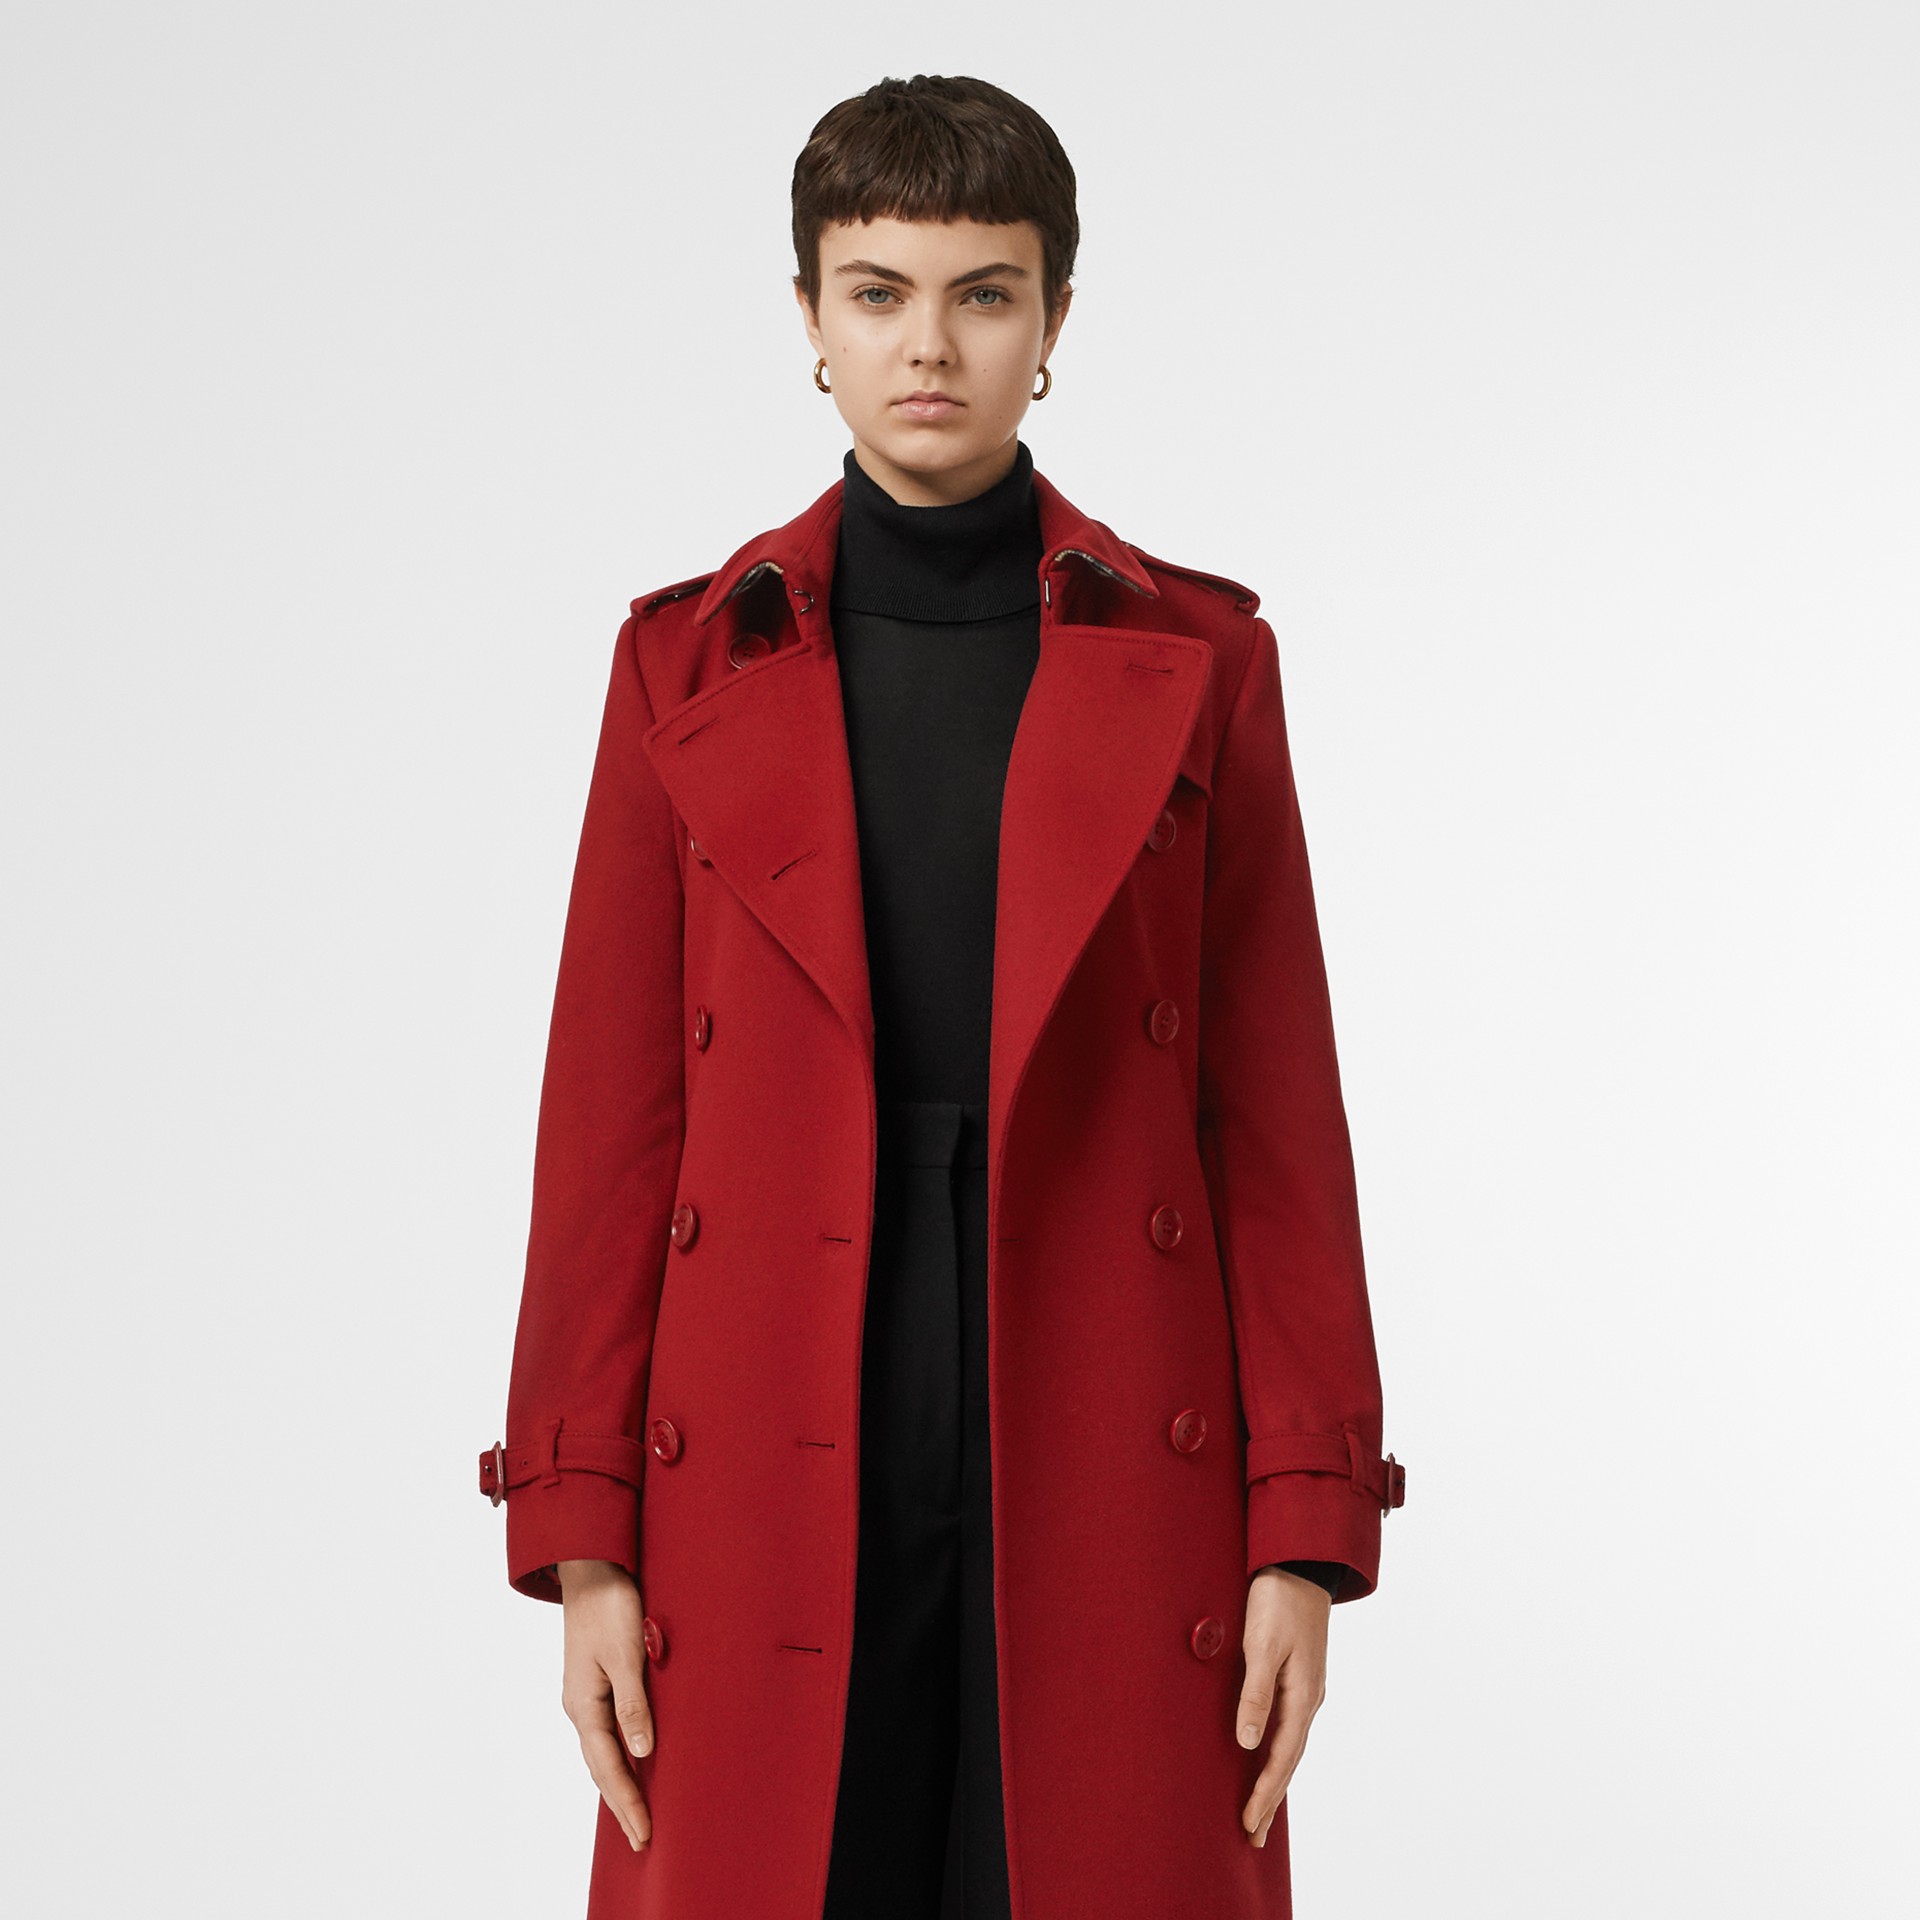 Cashmere Trench Coat in Red - Women | Burberry Canada